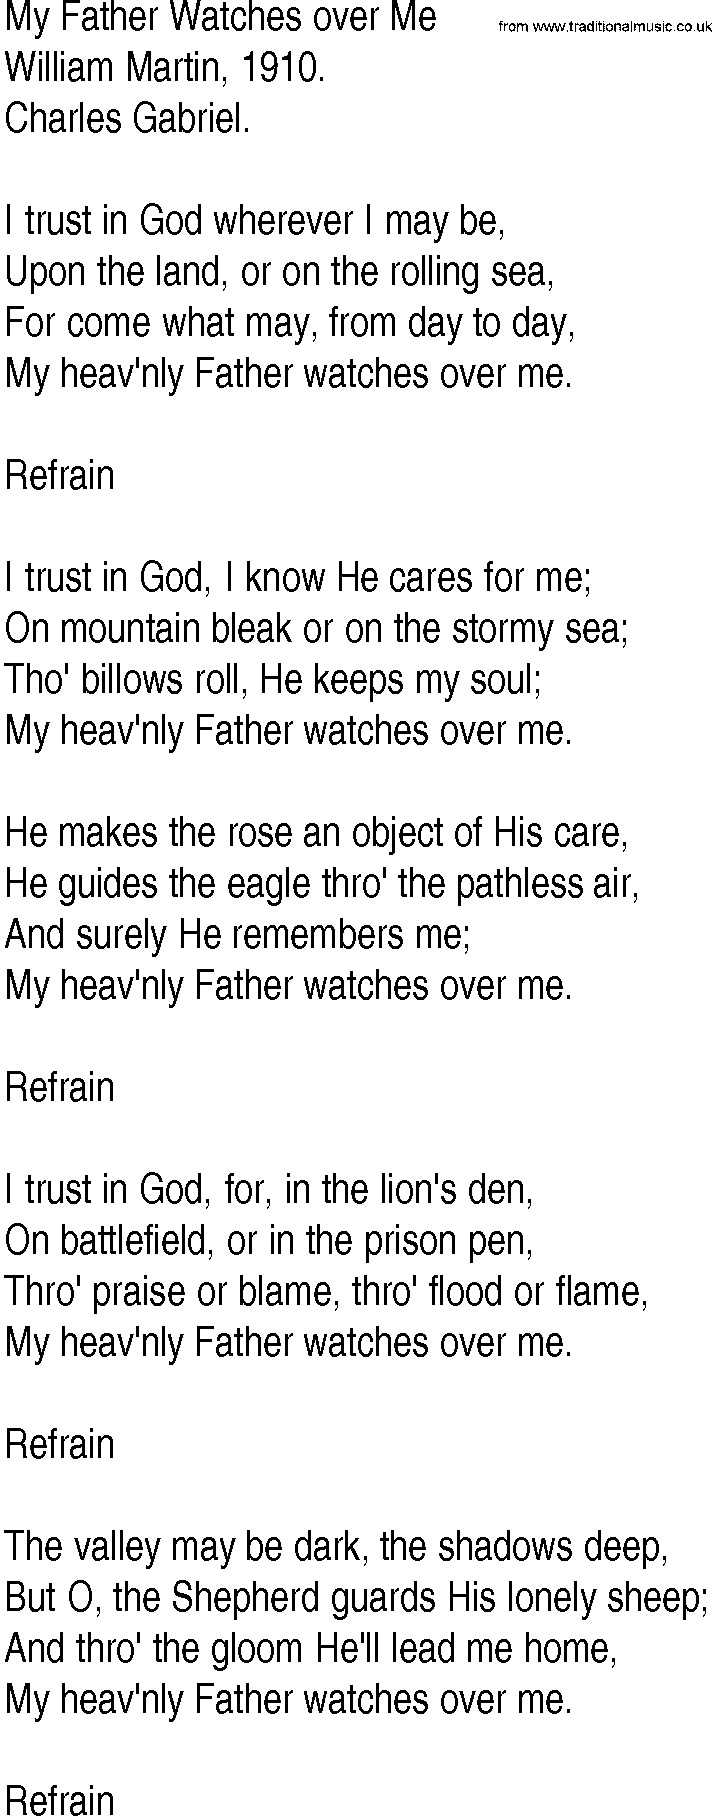 Hymn and Gospel Song: My Father Watches over Me by William Martin lyrics